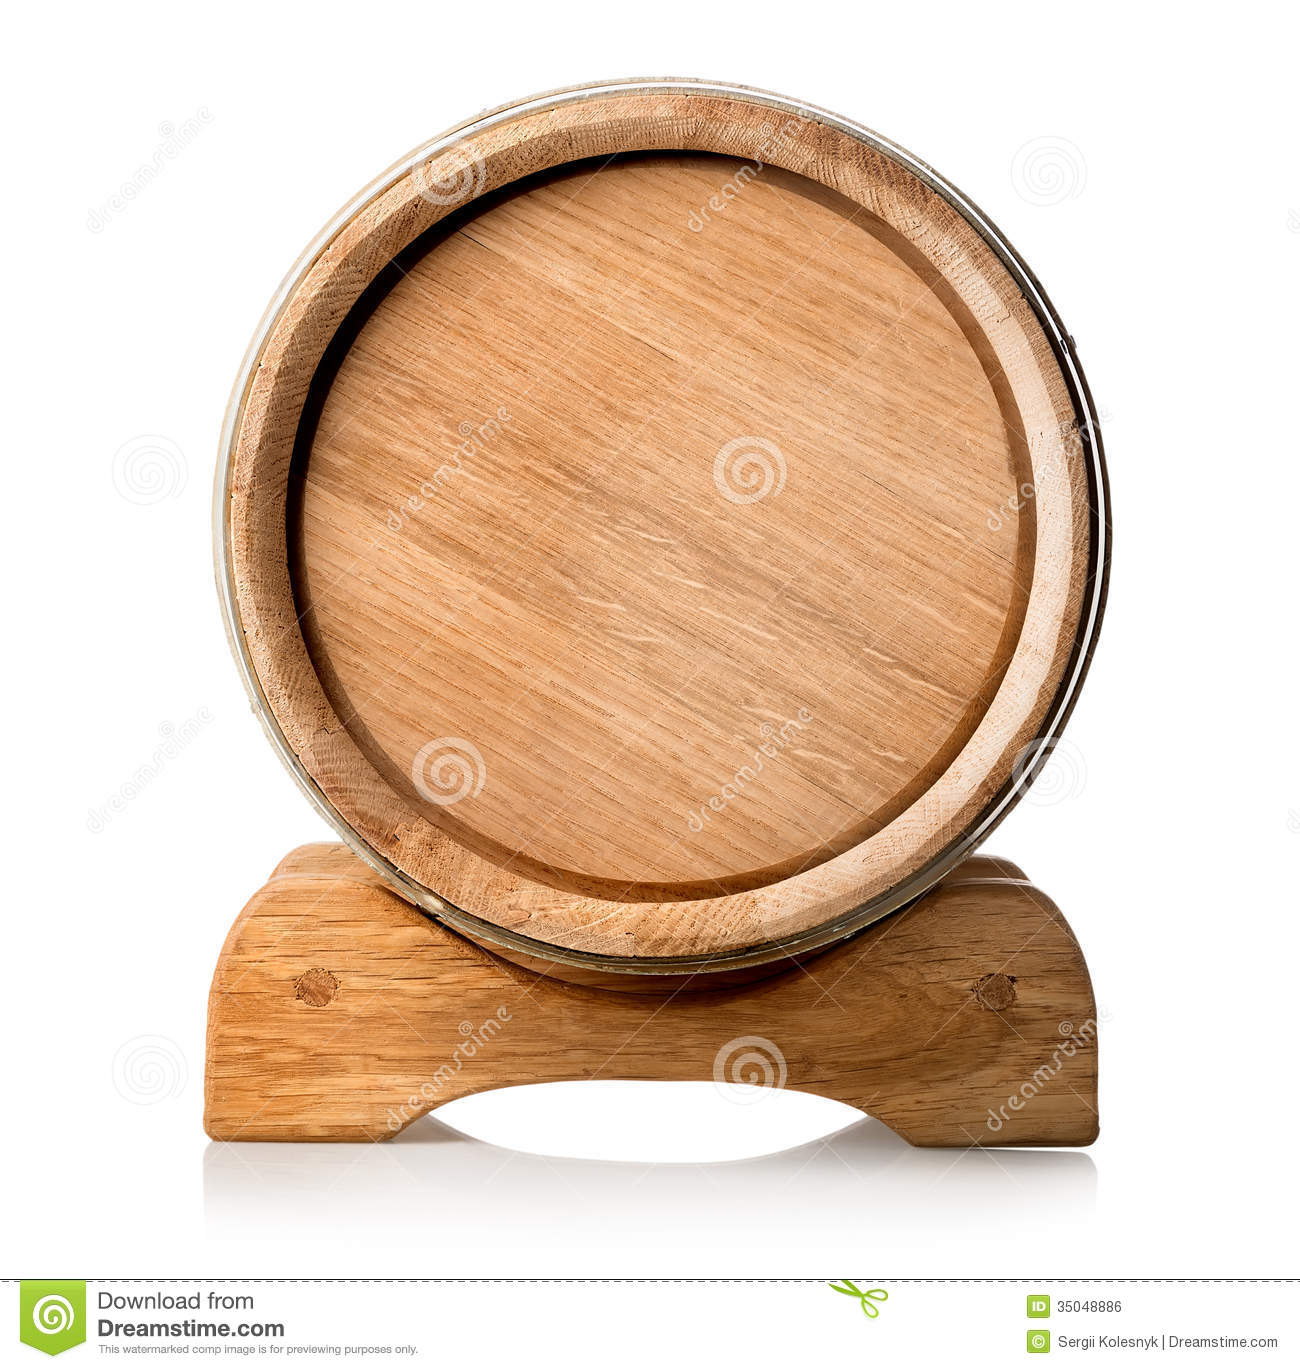 Wooden Barrel On The Stand Royalty Free Stock Image   Image  35048886